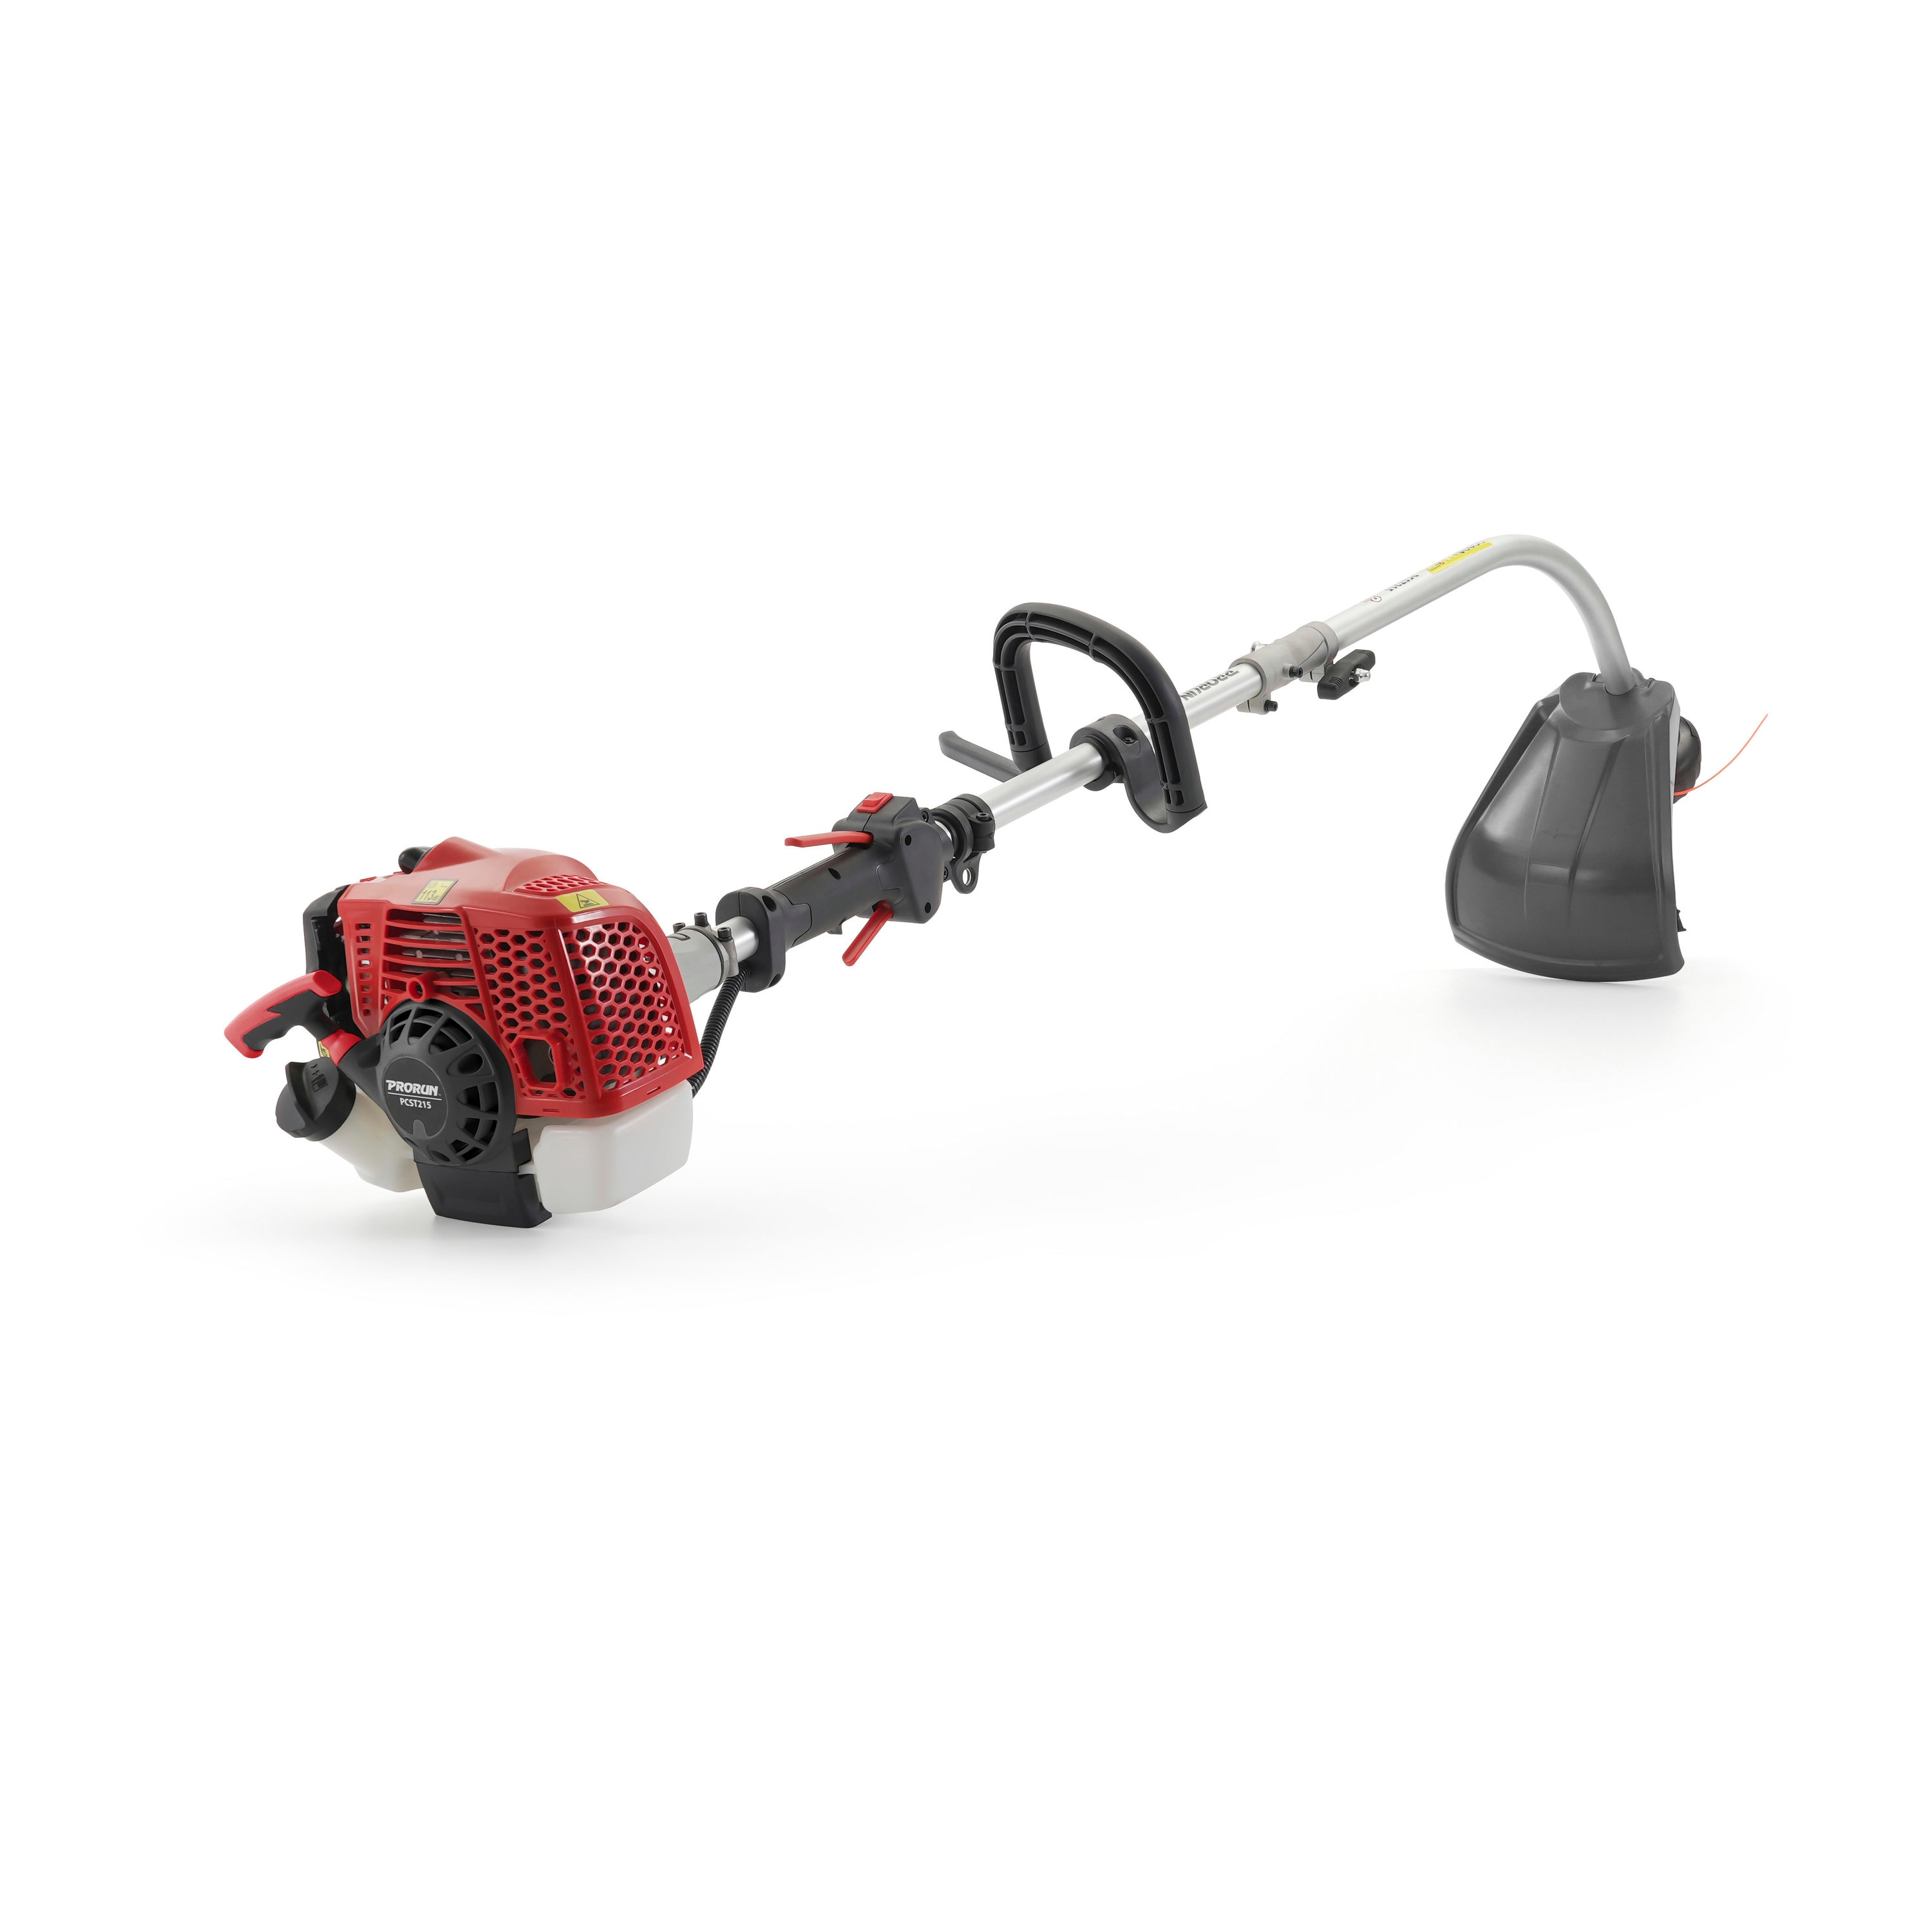 PRORUN PRORUN 25cc 15-in. Gas-Powered Curved Shaft Trimmer at